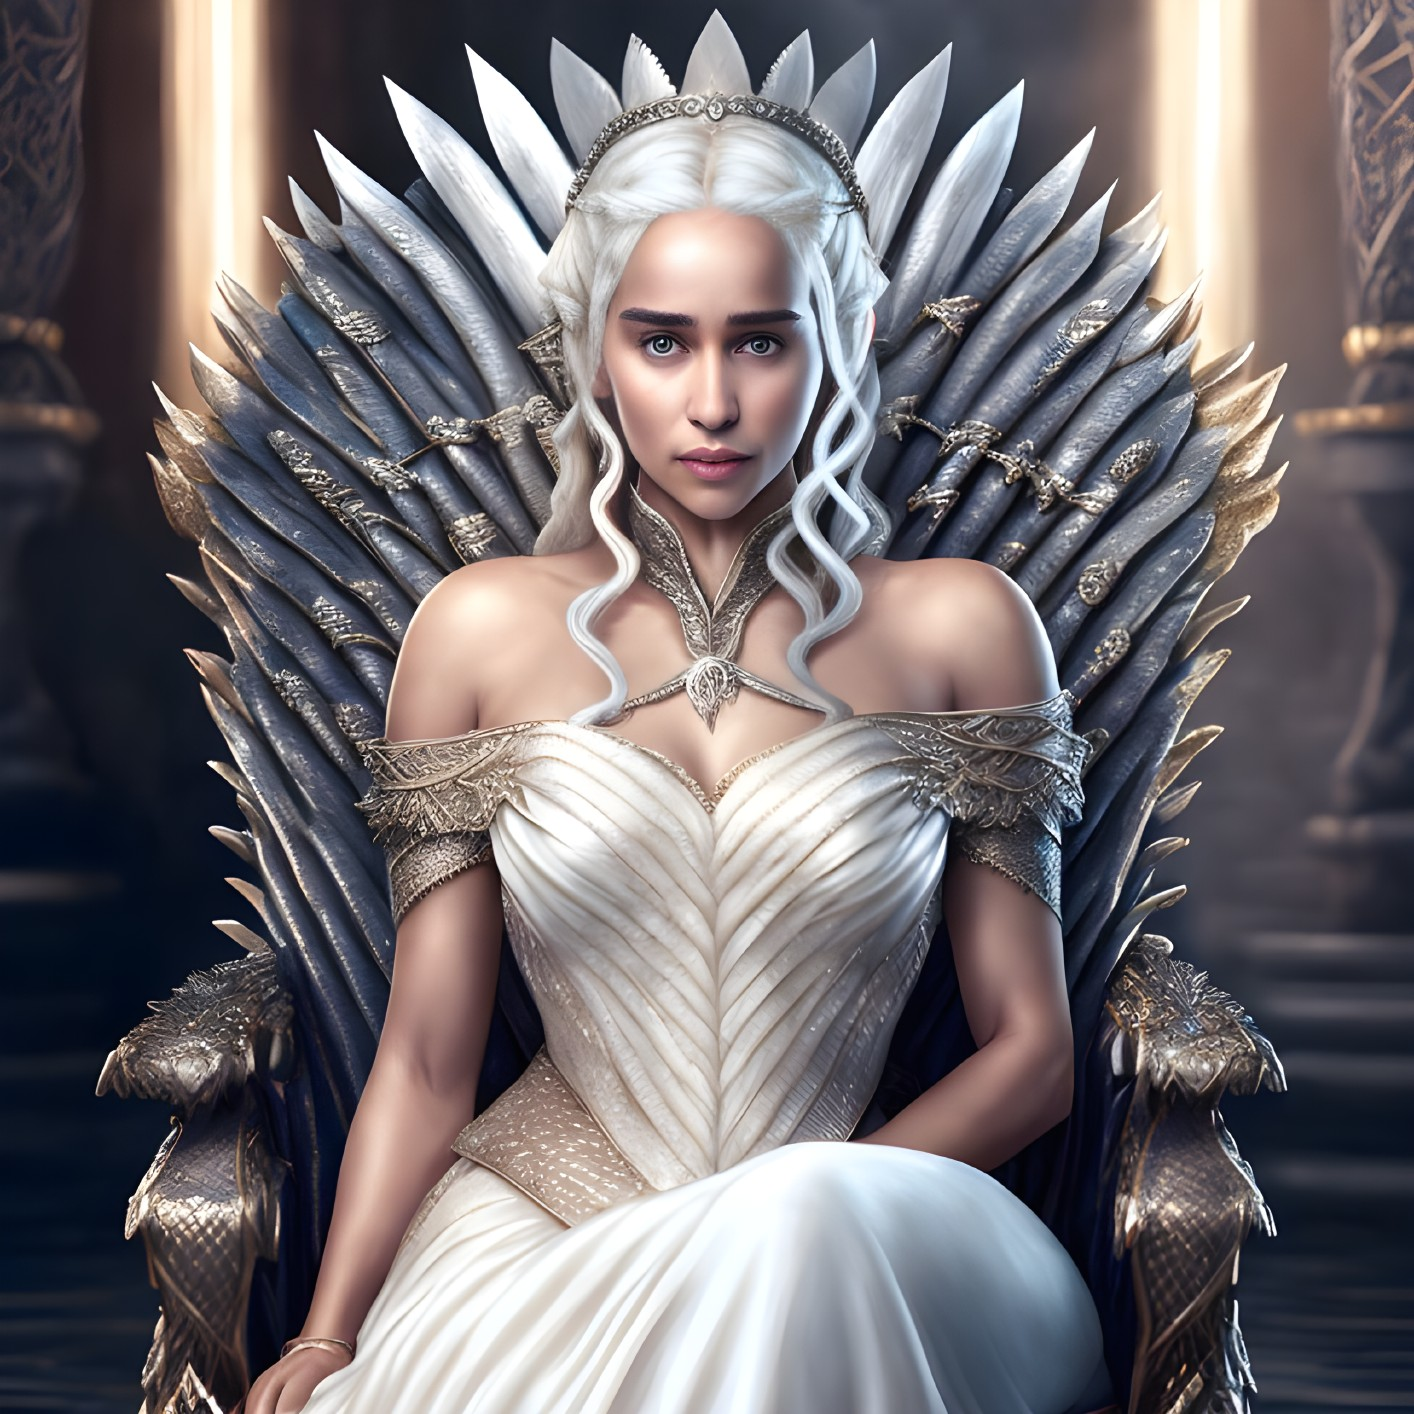 Lady of the Seven Kingdoms